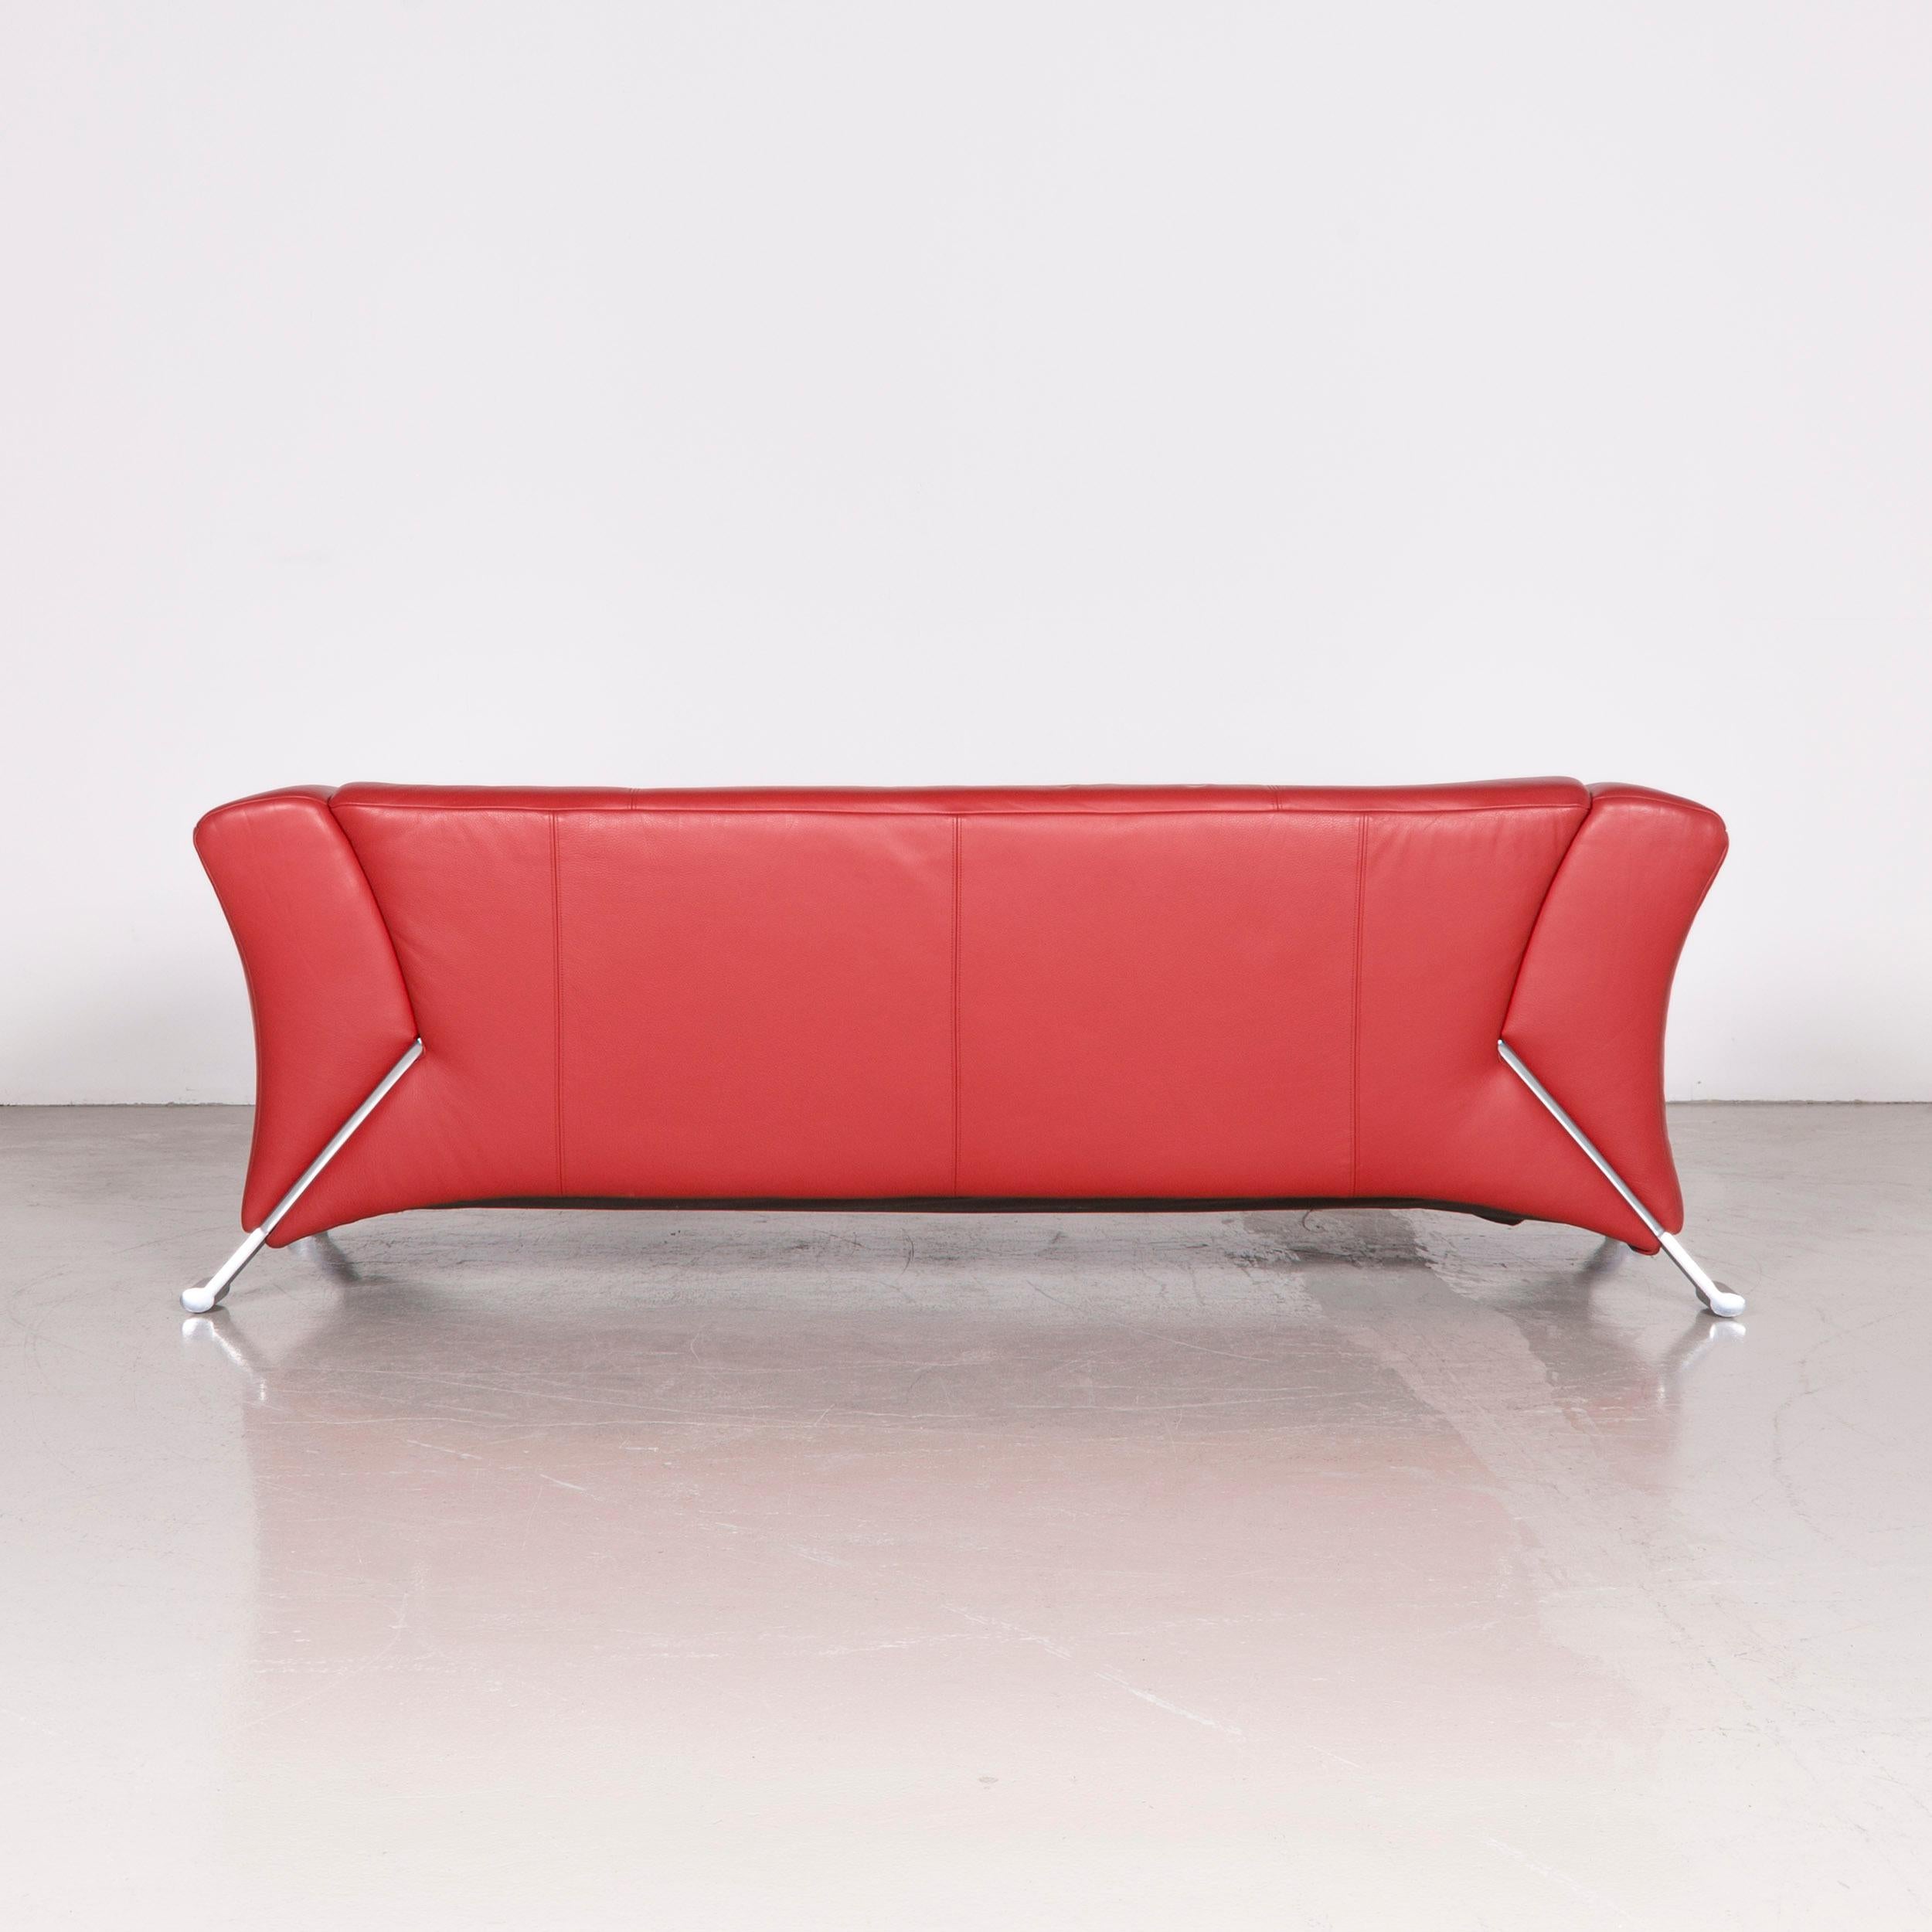 Metal Rolf Benz 322 Designer Sofa Red Three-Seat Leather Couch